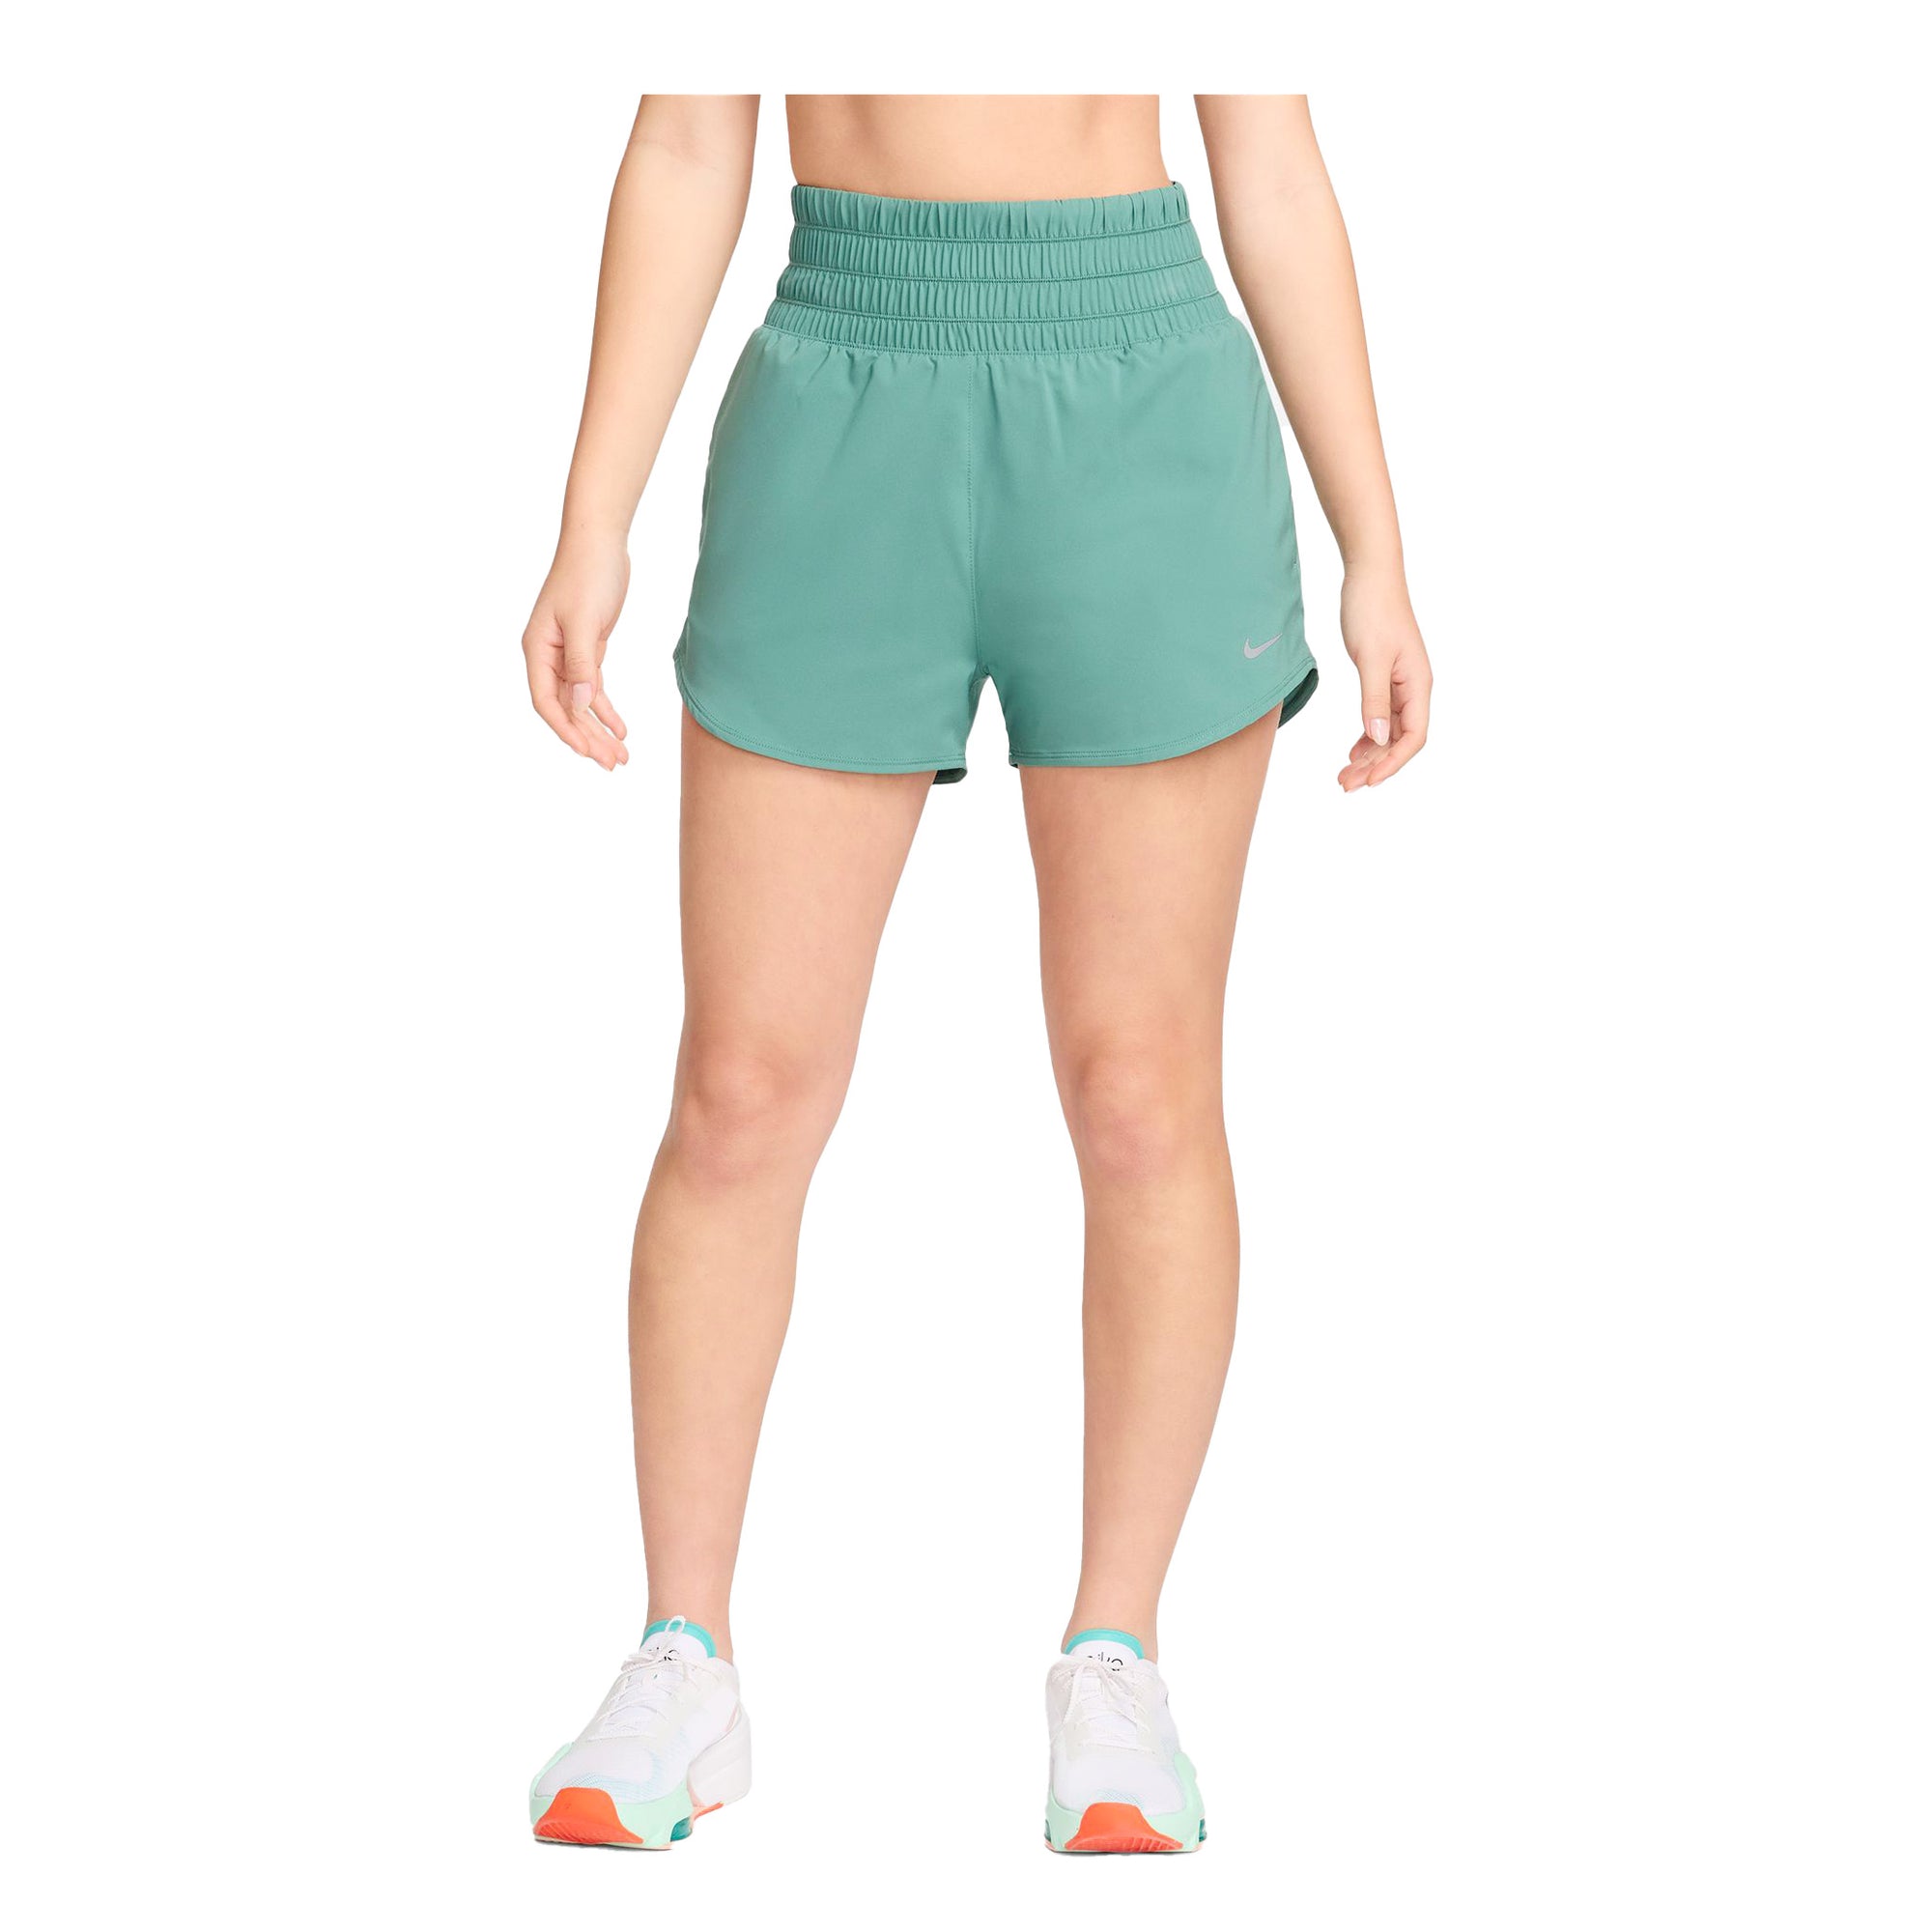 NIKE ONE DRI-FIT ULTRA HIGH-WAISTED 3" BRIEF-LINED - WOMEN